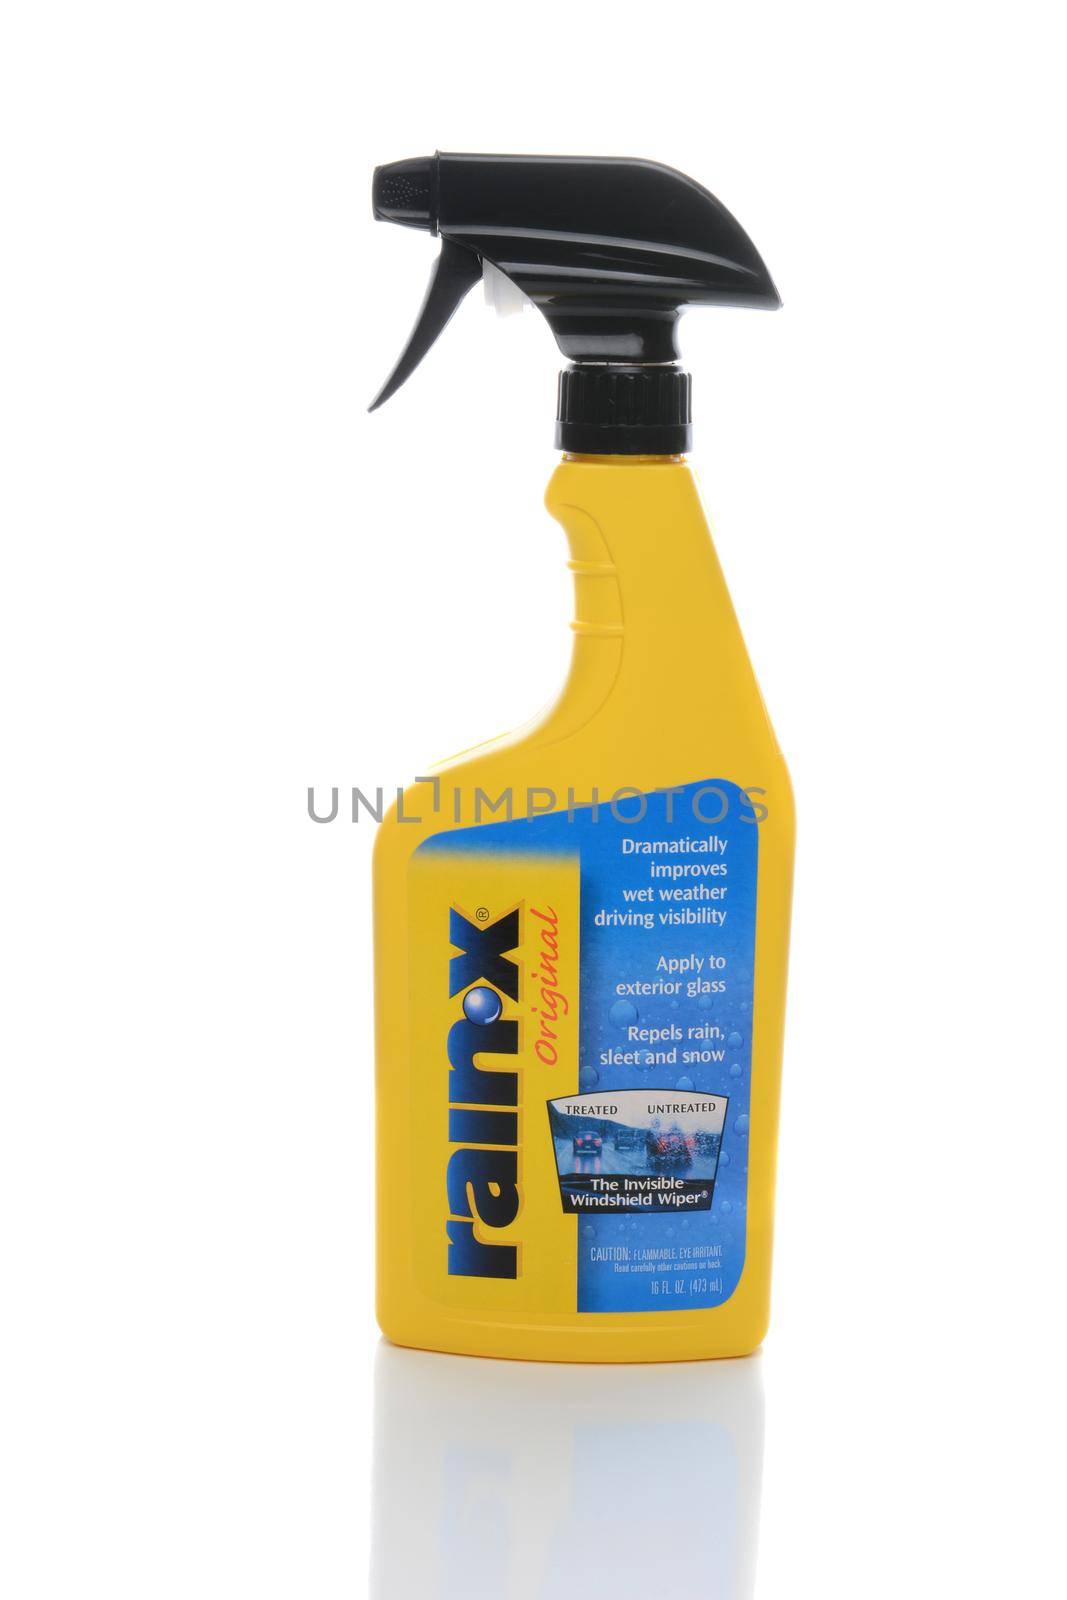 IRVINE, CA - FEBRUARY 19, 2015: Rain-X windshield treatment. The product when applied to car windshields causes water to bead on the glass increasing the drivers visibility.